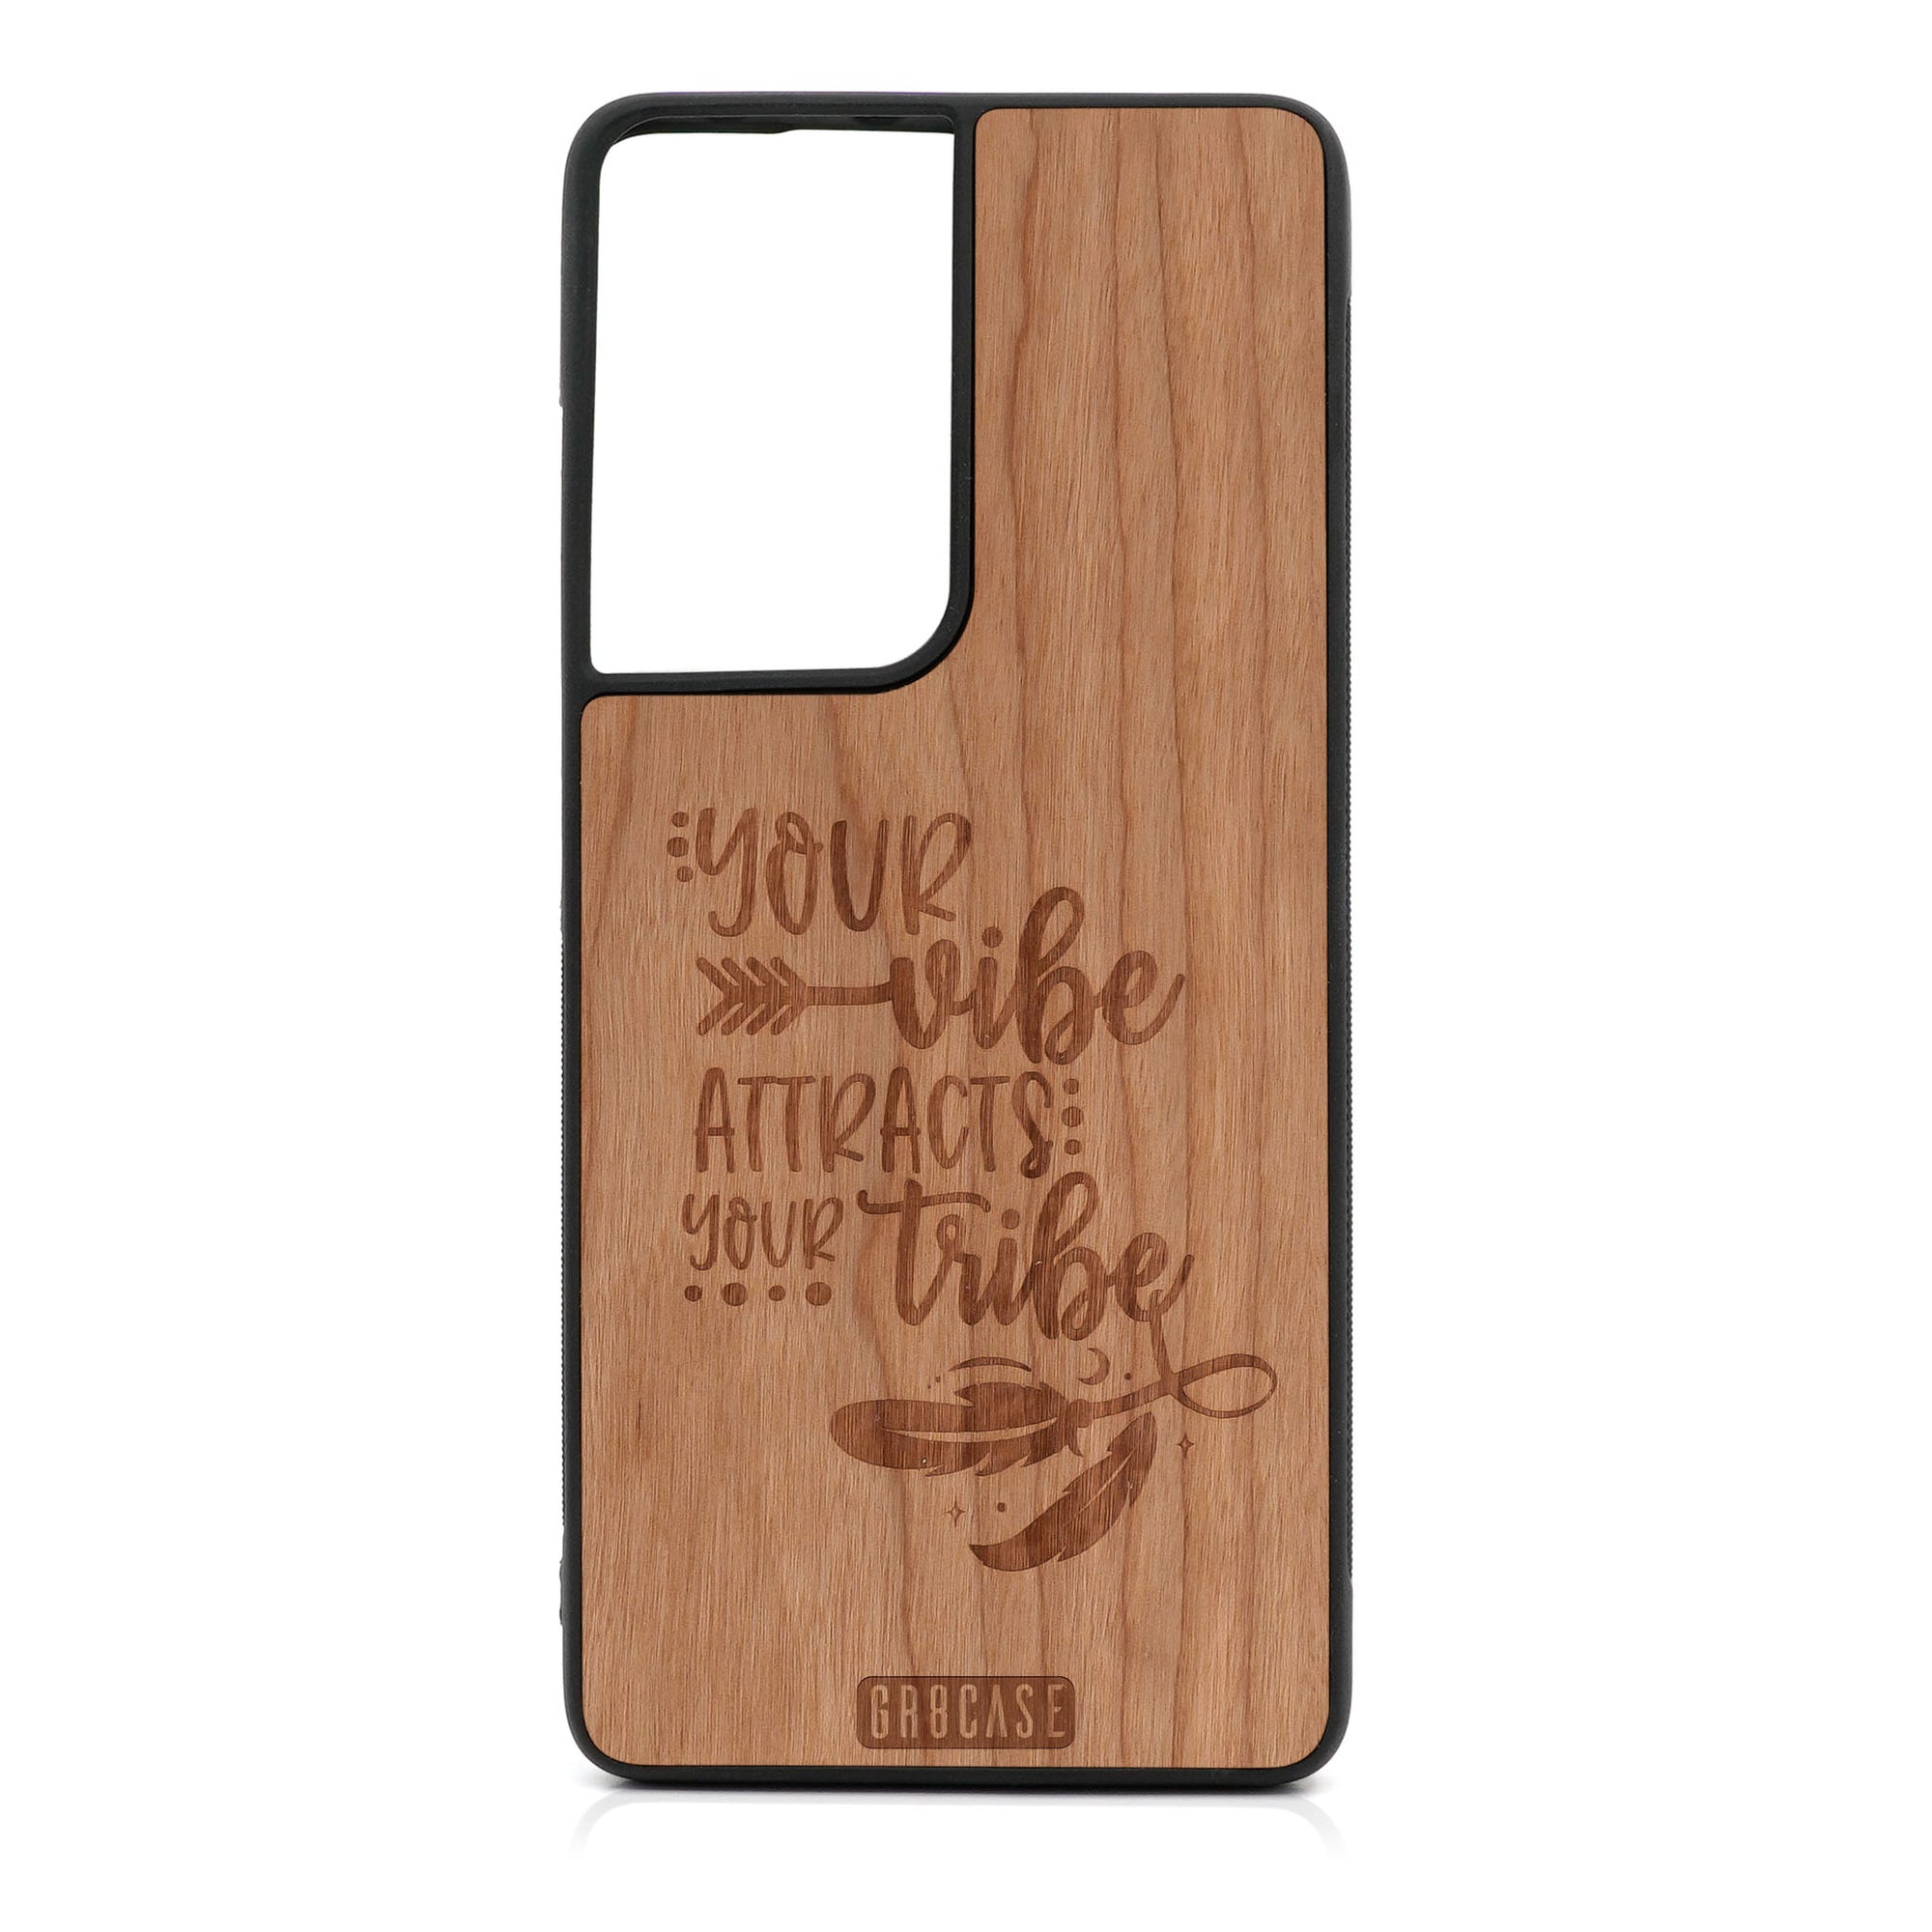 Your Vibe Attracts Your Tribe Design Wood Case For Samsung Galaxy S21 Ultra 5G